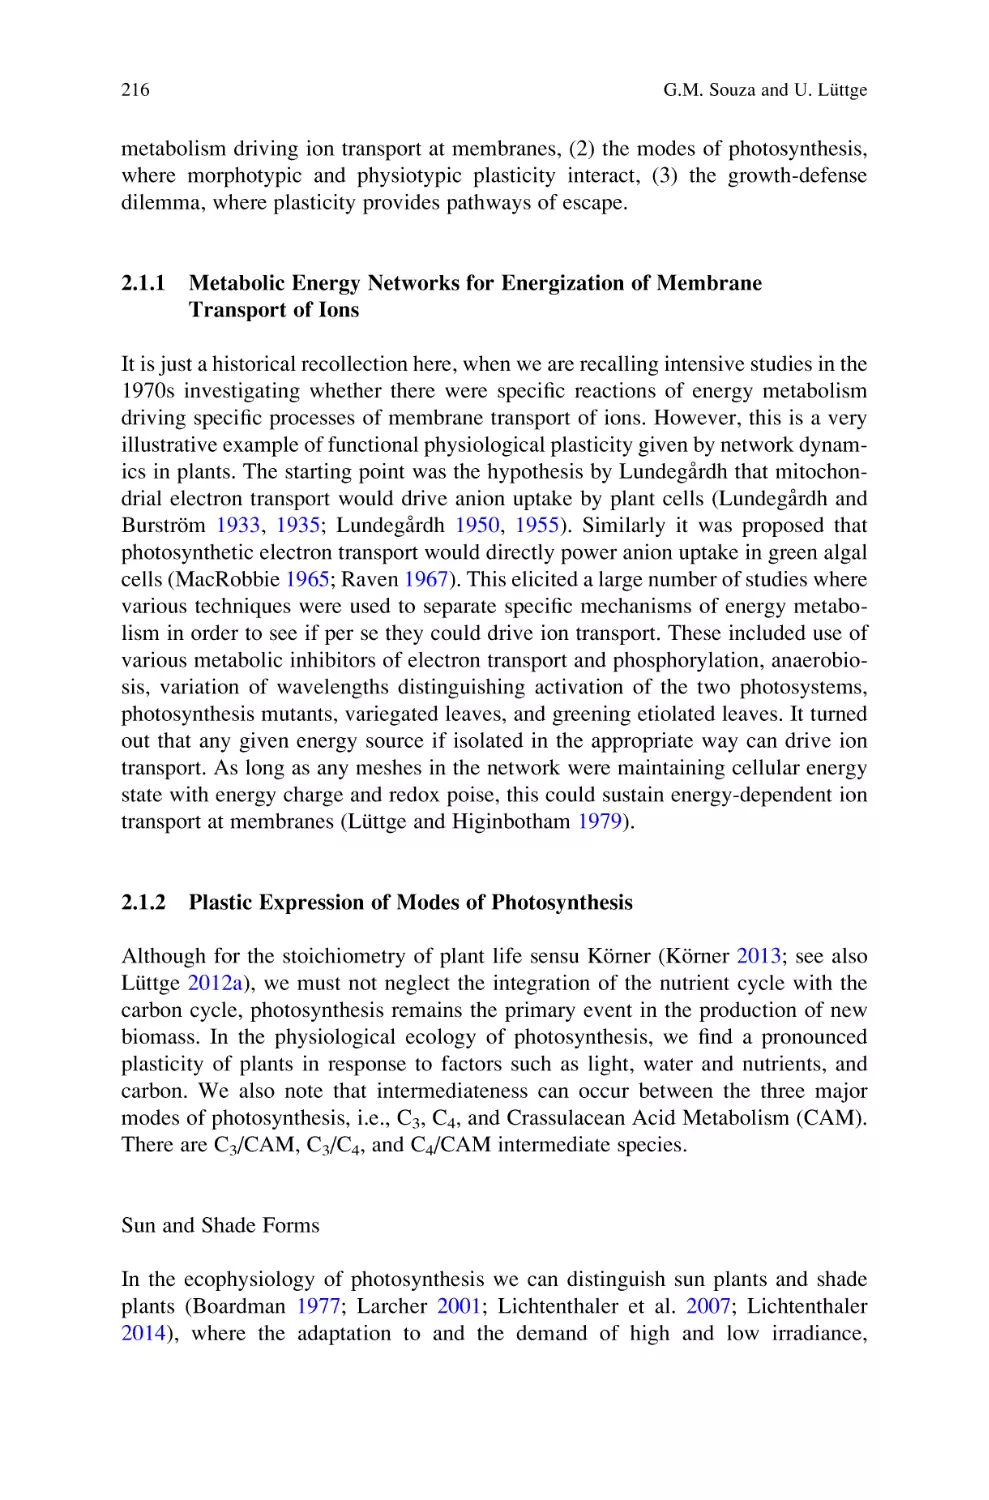 2.1.1 Metabolic Energy Networks for Energization of Membrane Transport of Ions
2.1.2 Plastic Expression of Modes of Photosynthesis
Sun and Shade Forms